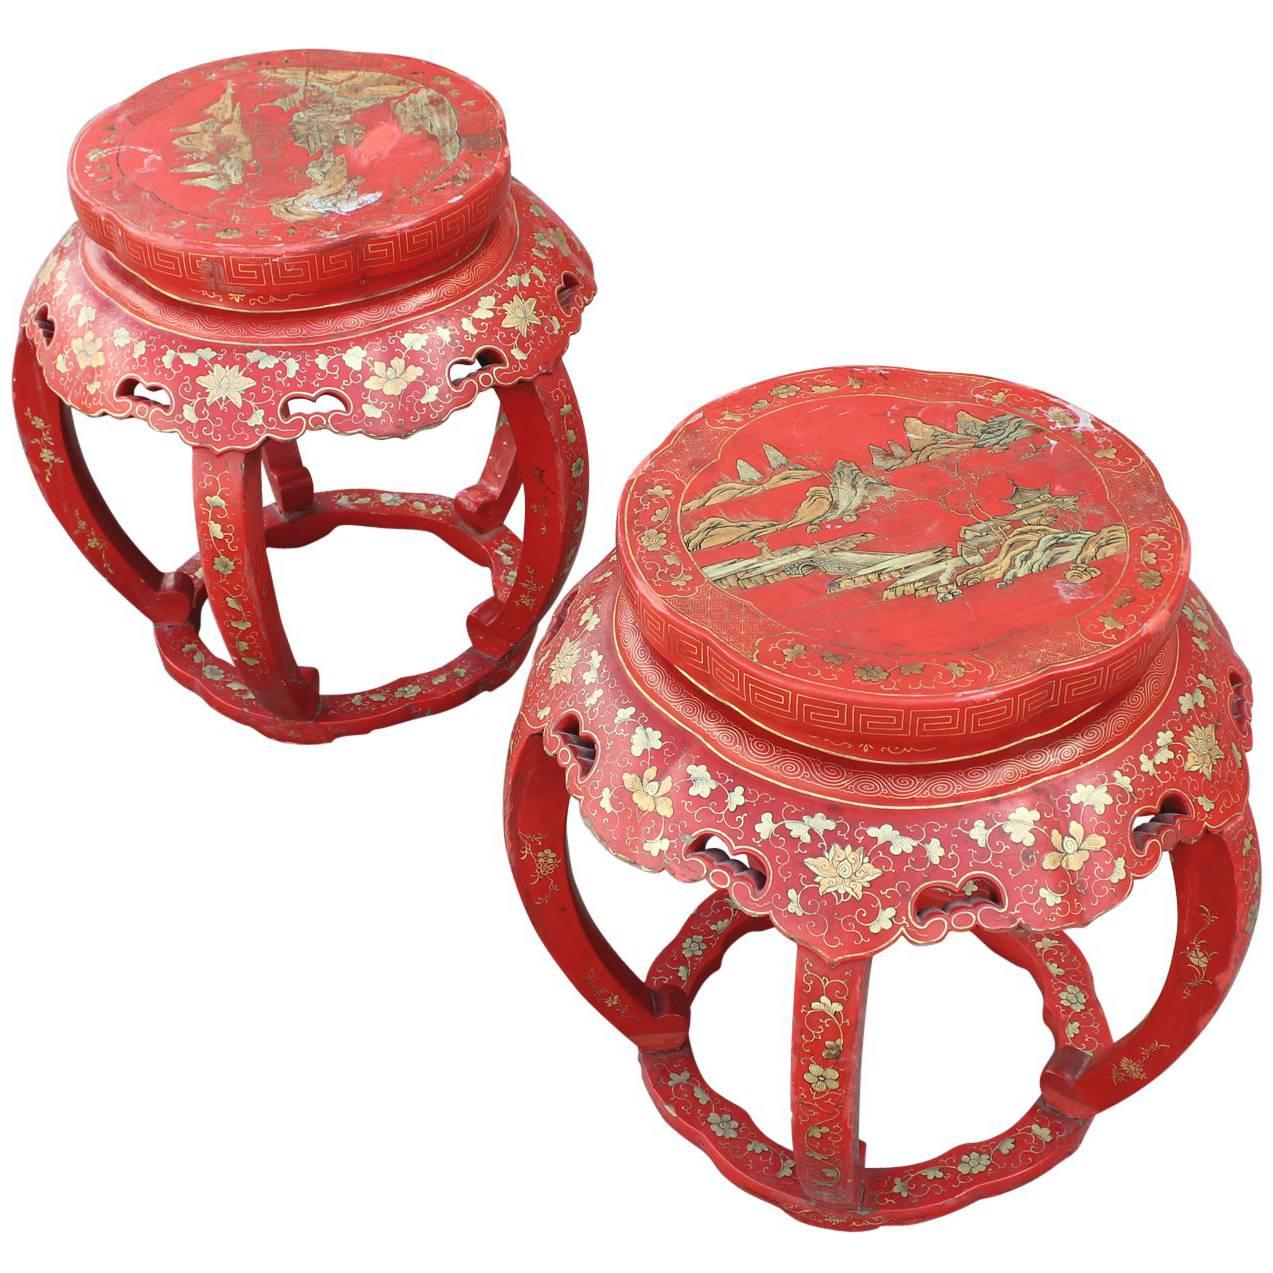 Pair of Red Orange Asian Chinoiserie Side Tables/Stools